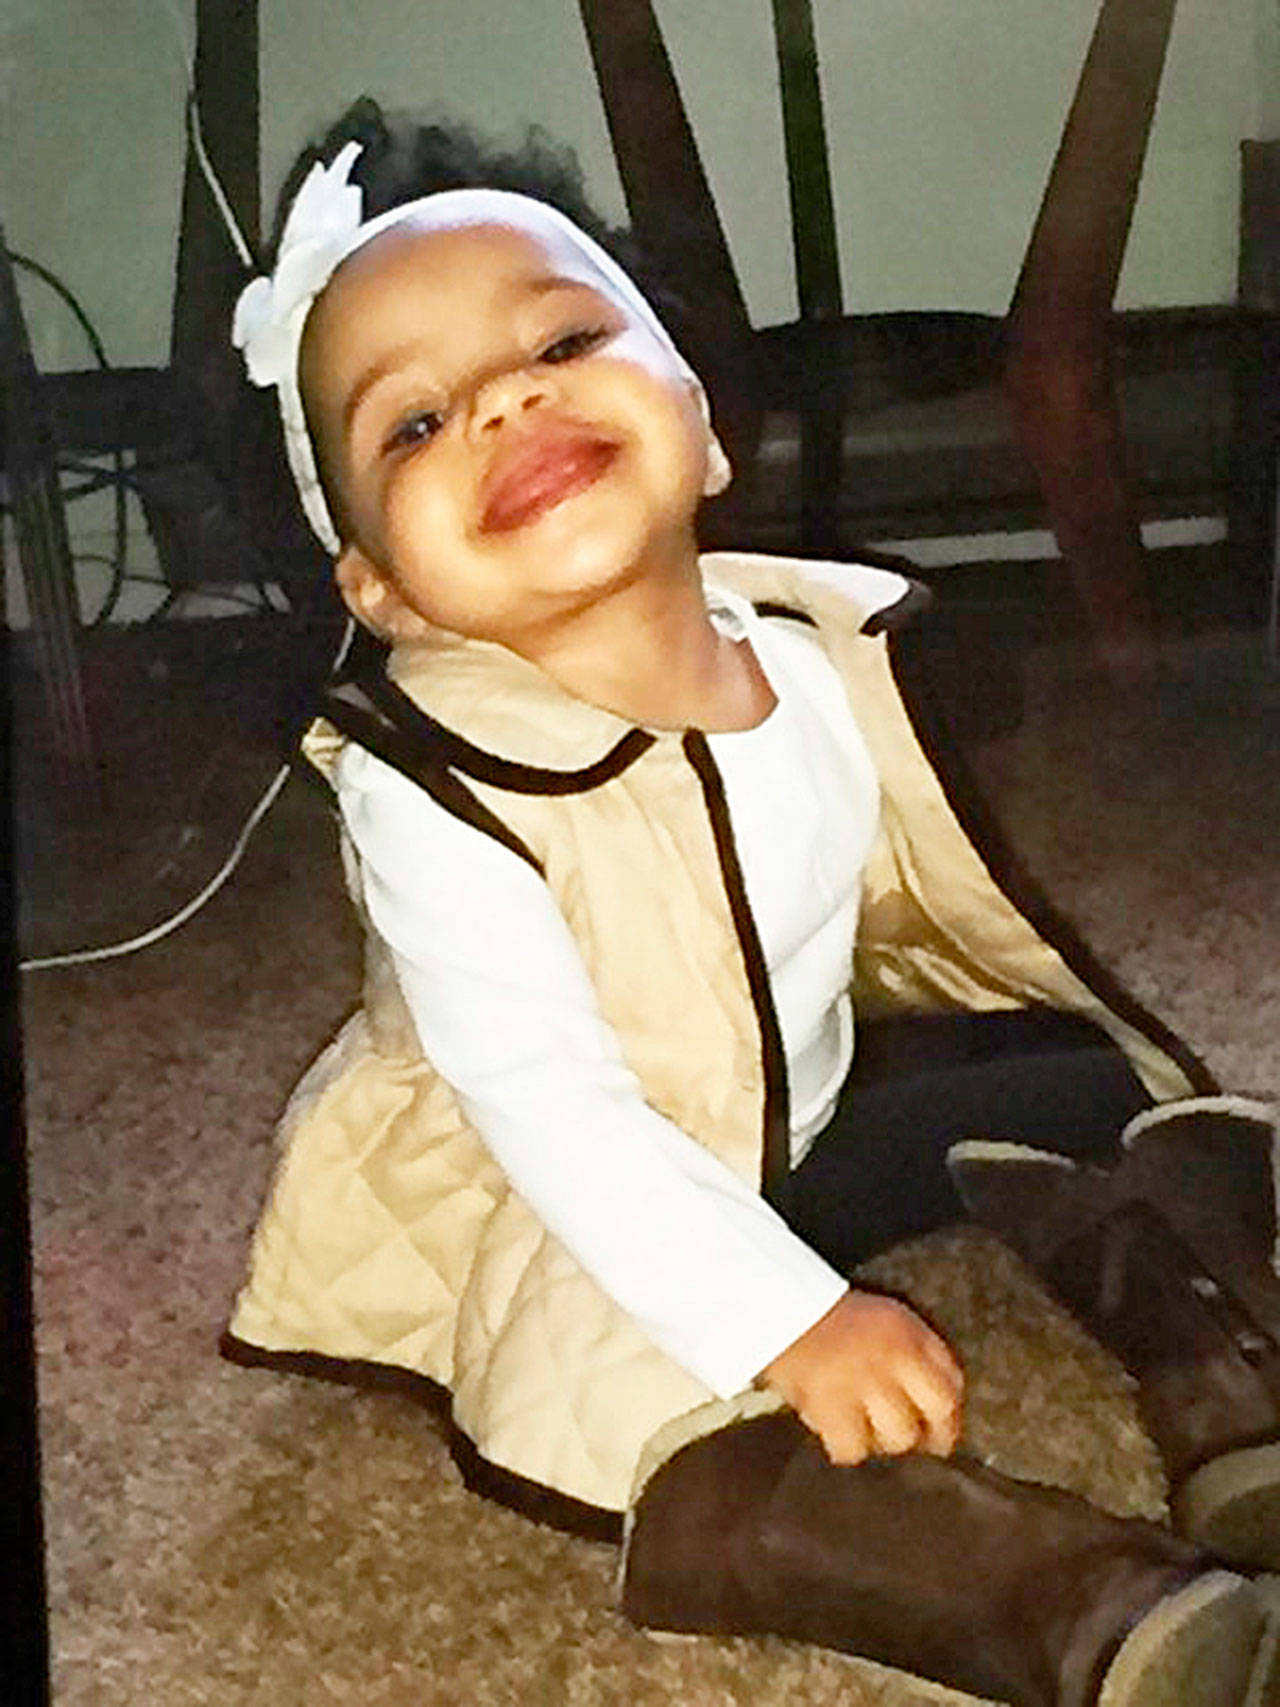 Malijah Grant, 1, was fatally shot in April 2015 in Kent during a drive-by shooting. COURTESY PHOTO